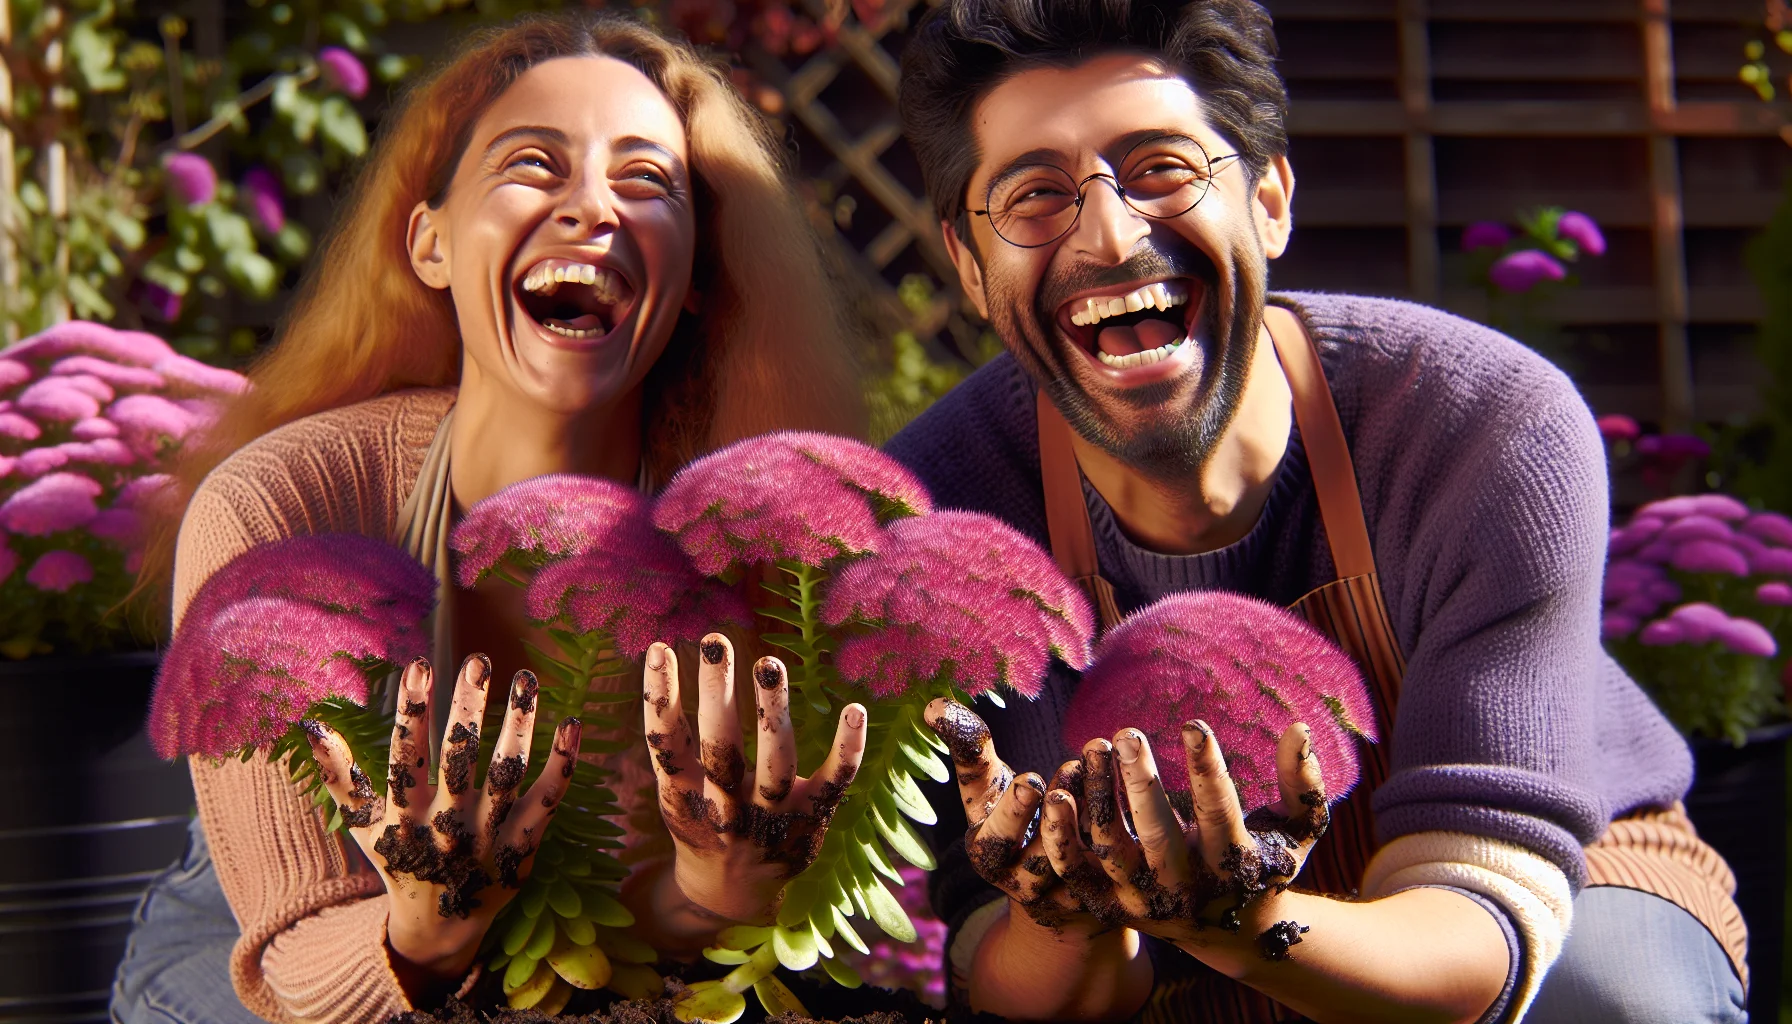 Humorous scene of gardening featuring realistically portrayed purple sedum. The scene shows a Middle-Eastern woman and a Hispanic man, both amateur gardeners, laughing heartily as they show their freshly muddy hands from planting the sedum. Vivid purple sedum is in bloom, its succulent plump foliage making a striking contrast to the rich brown of the soil. They are in a sunlit backdrop of a garden, their delight highlighting the joy of gardening. The image should evoke the charm and fun of gardening and inspire people to try it for themselves.